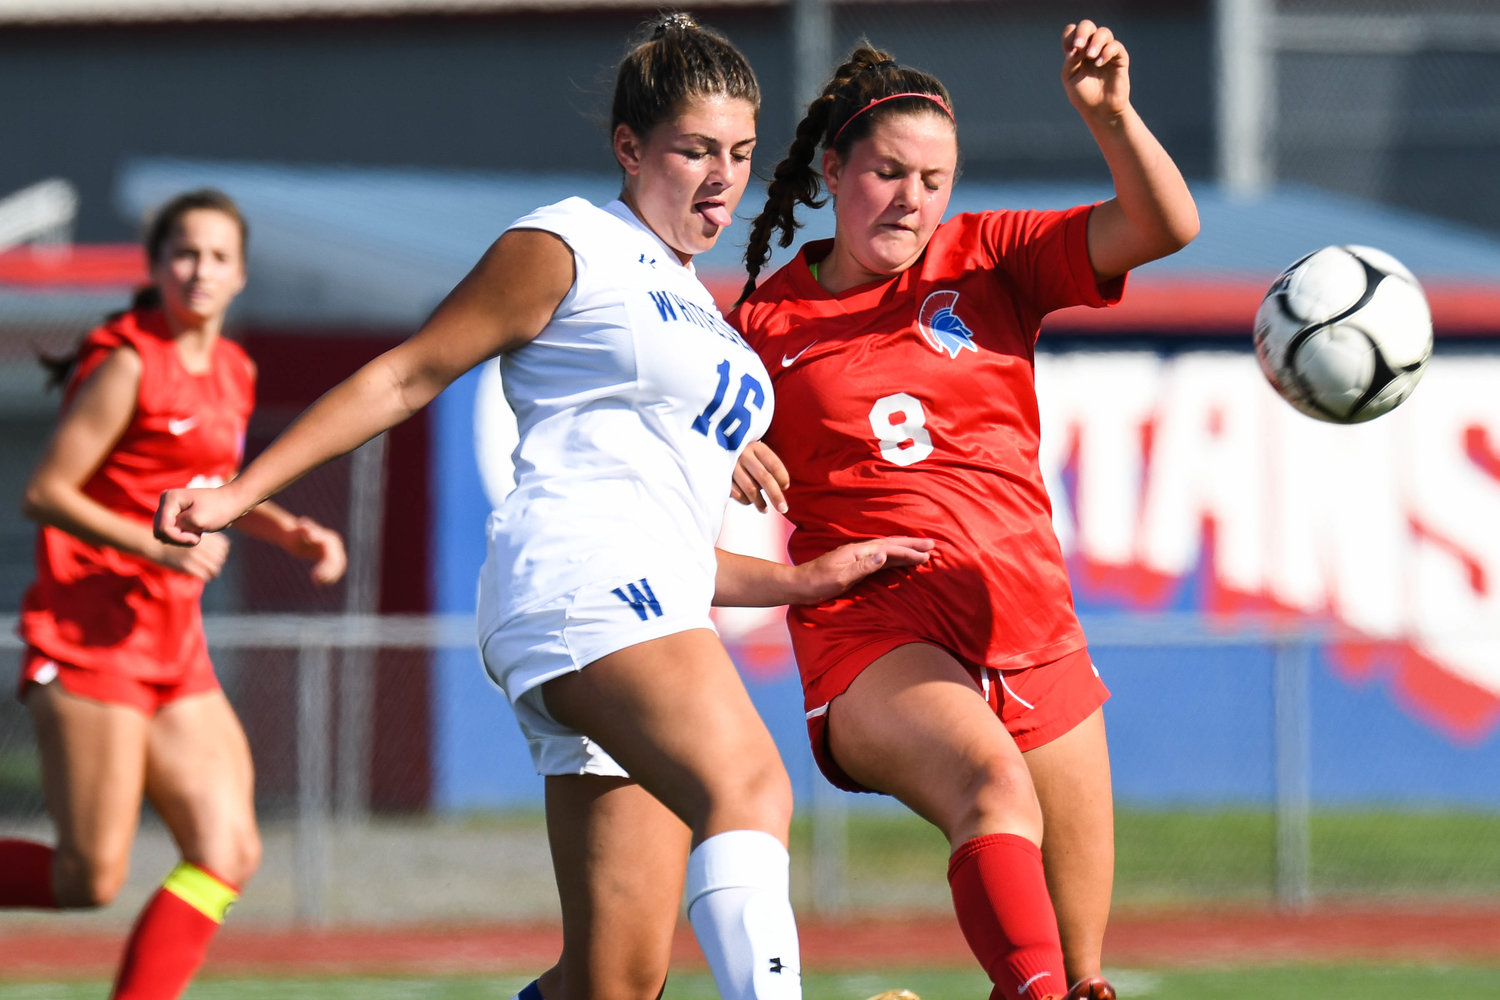 Whitesboro player Morgan Angus, left, fights for control of the ball against New Hartford's Mia Roberts during the game on Thursday. New Hartford won 5-0.